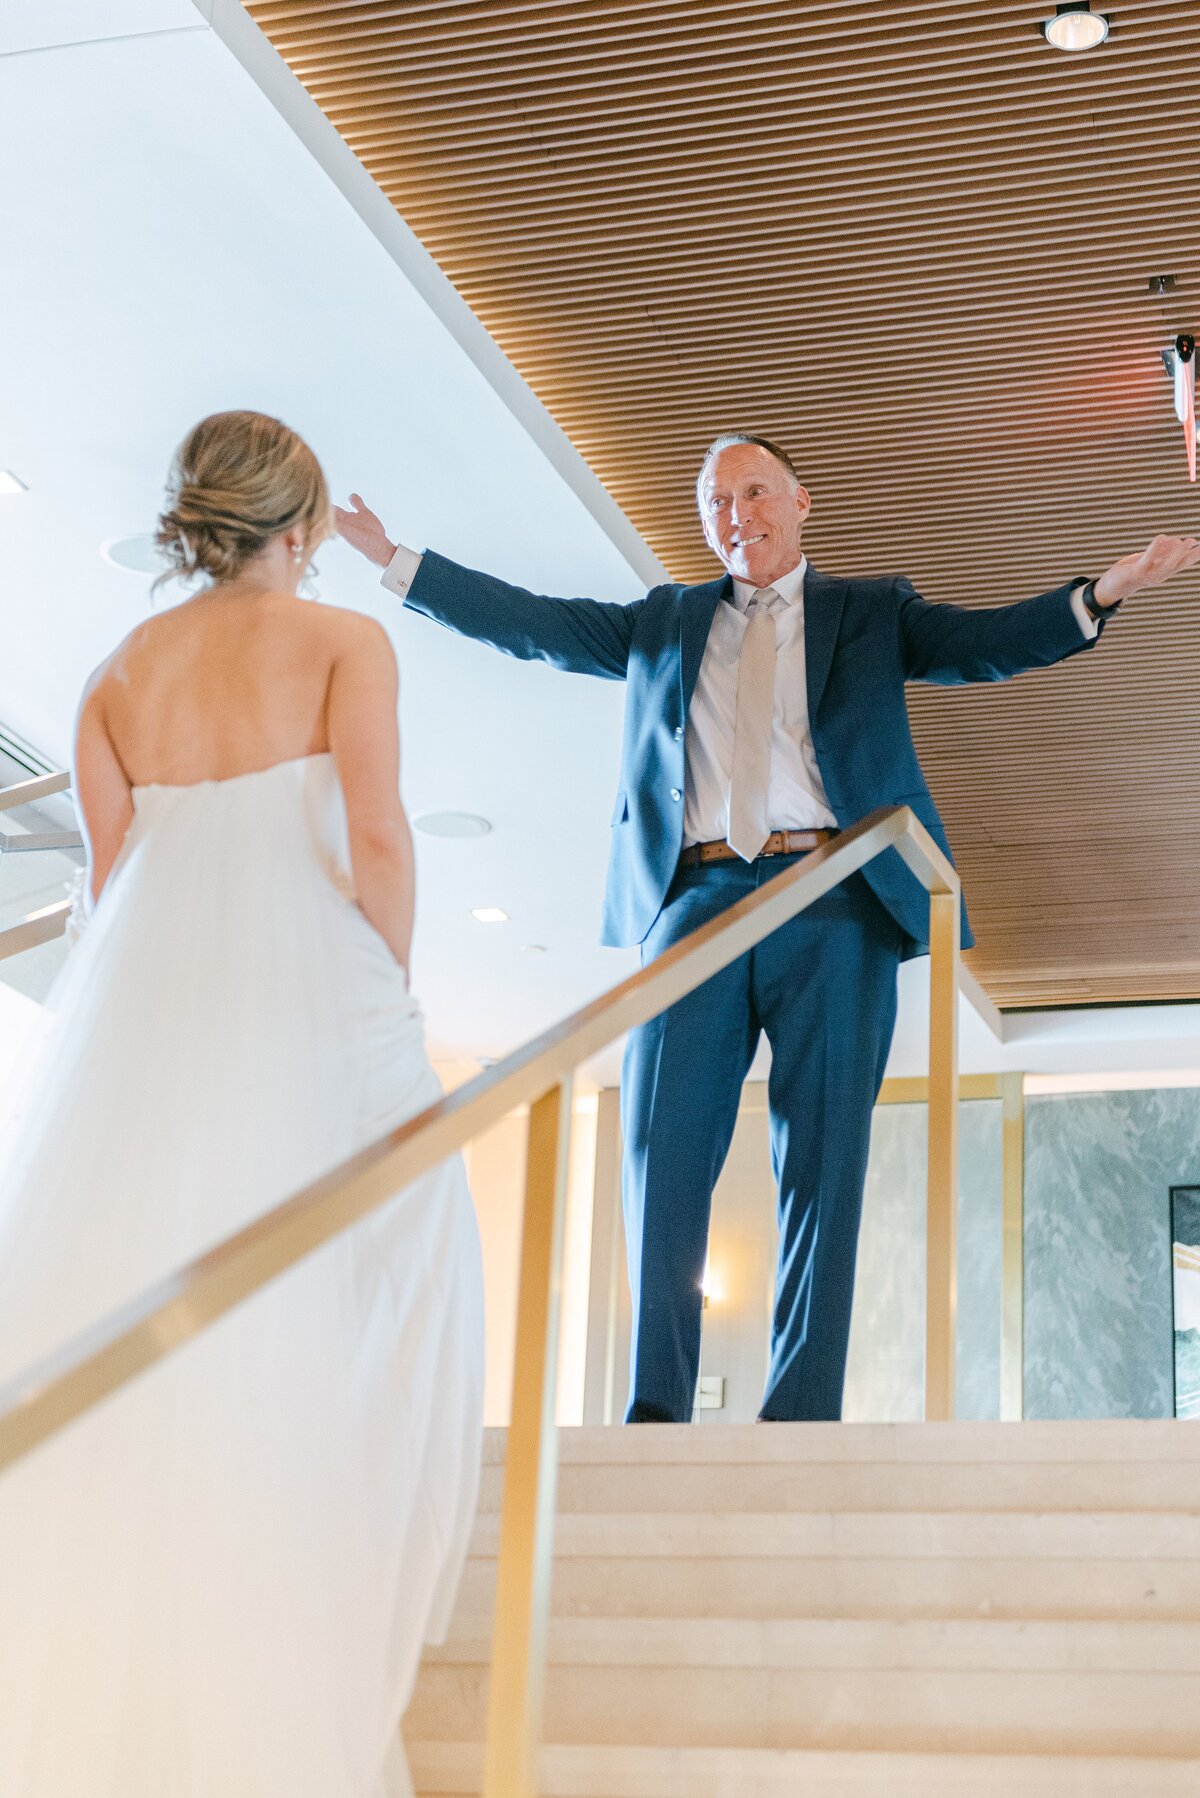 Event-Planning-DC-Wedding-First-Look-with-dad-Dockmaster-Wharf-Photography-DuJOur.jpg